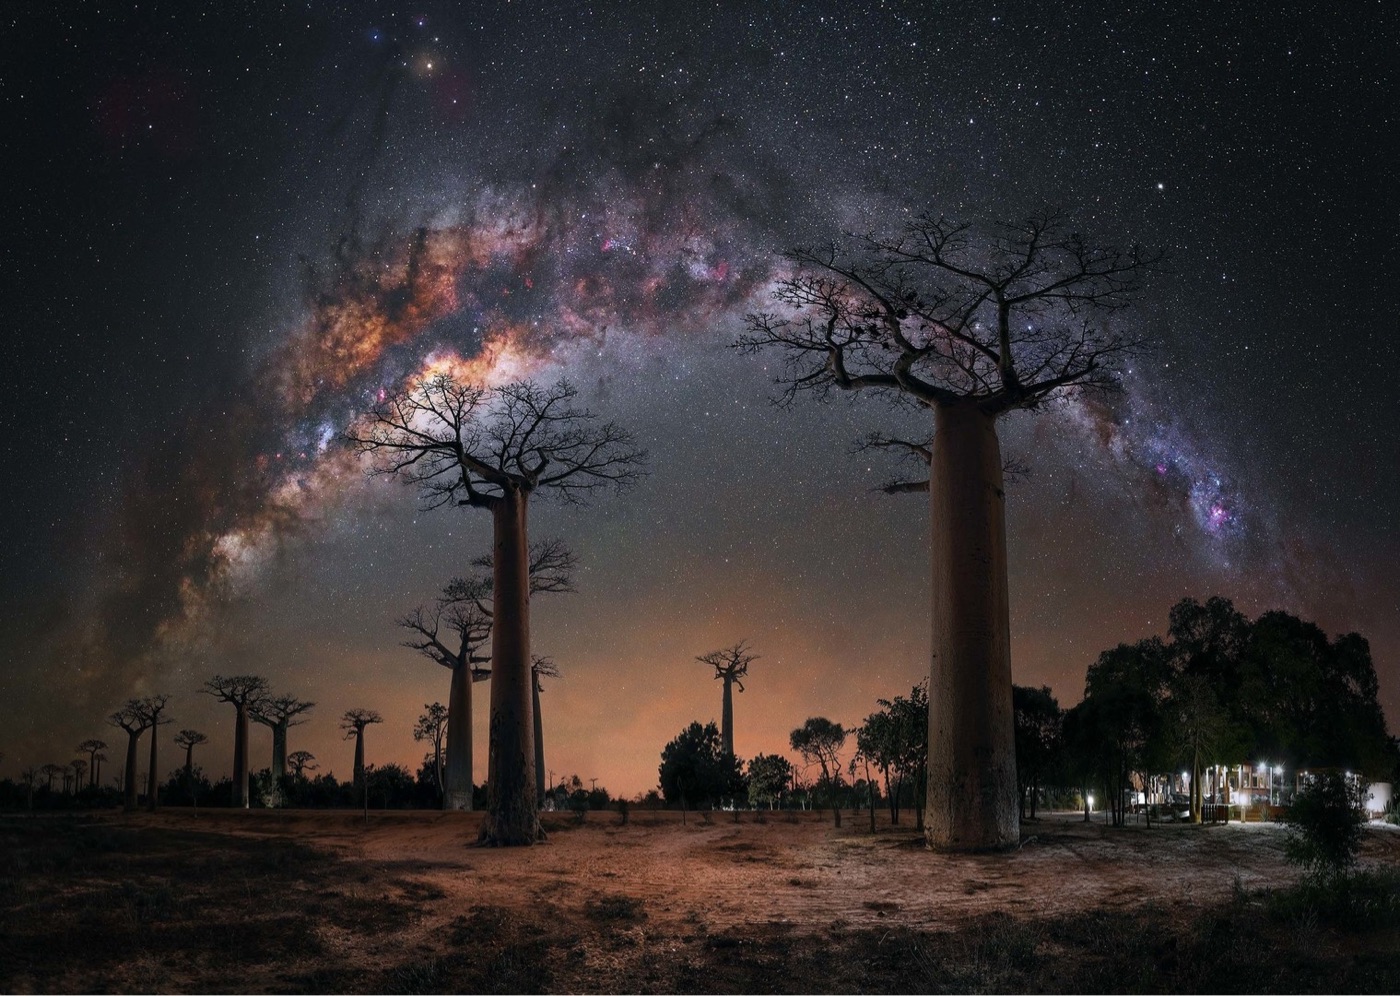 the Milky Way in the night sky over baobab trees in Madagascar